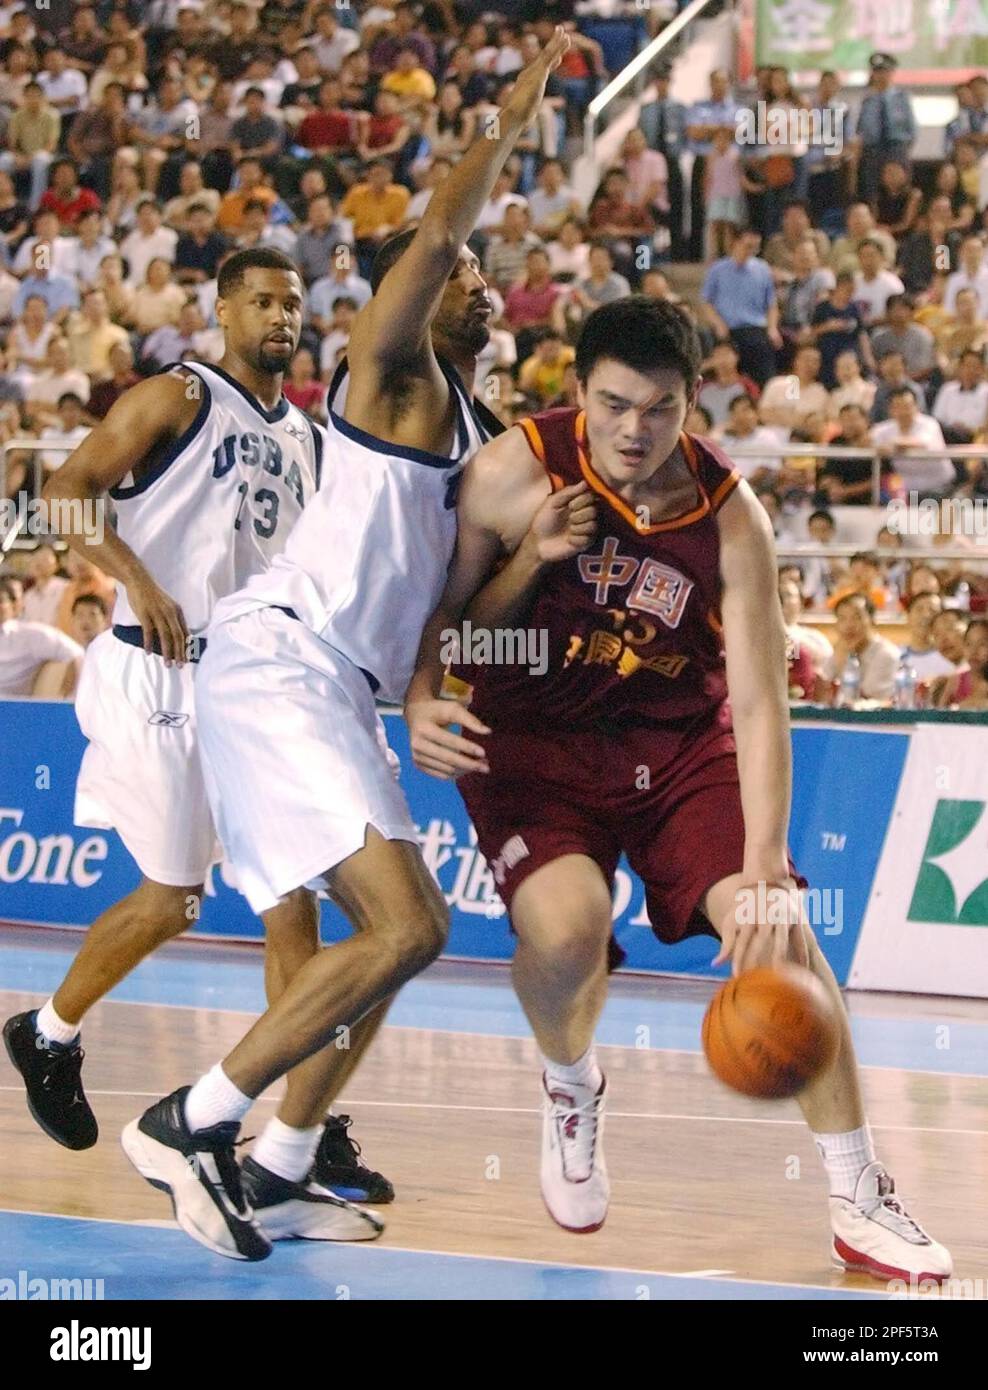 Yao Ming: The NBA star made by the order of the Chinese Government